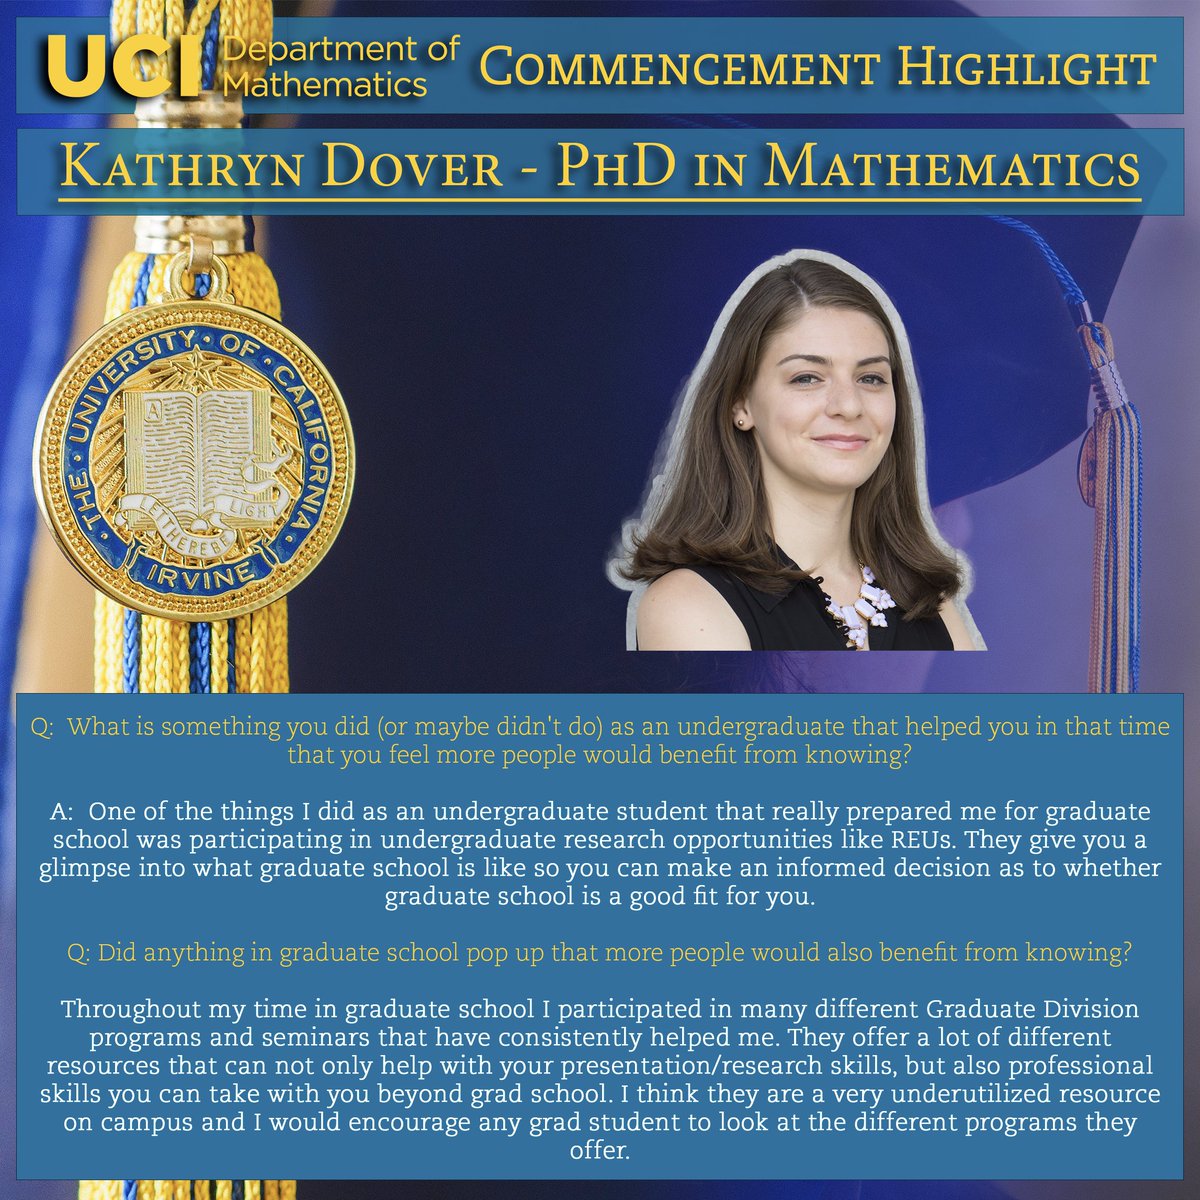 In anticipation of Commencement, we feature Kathryn Dover, a graduating PhD student. Learn about her work and tune into her words of advice for future students of mathematics. #ucimath #ucicommencement #commencement #graduation #ucigraduation